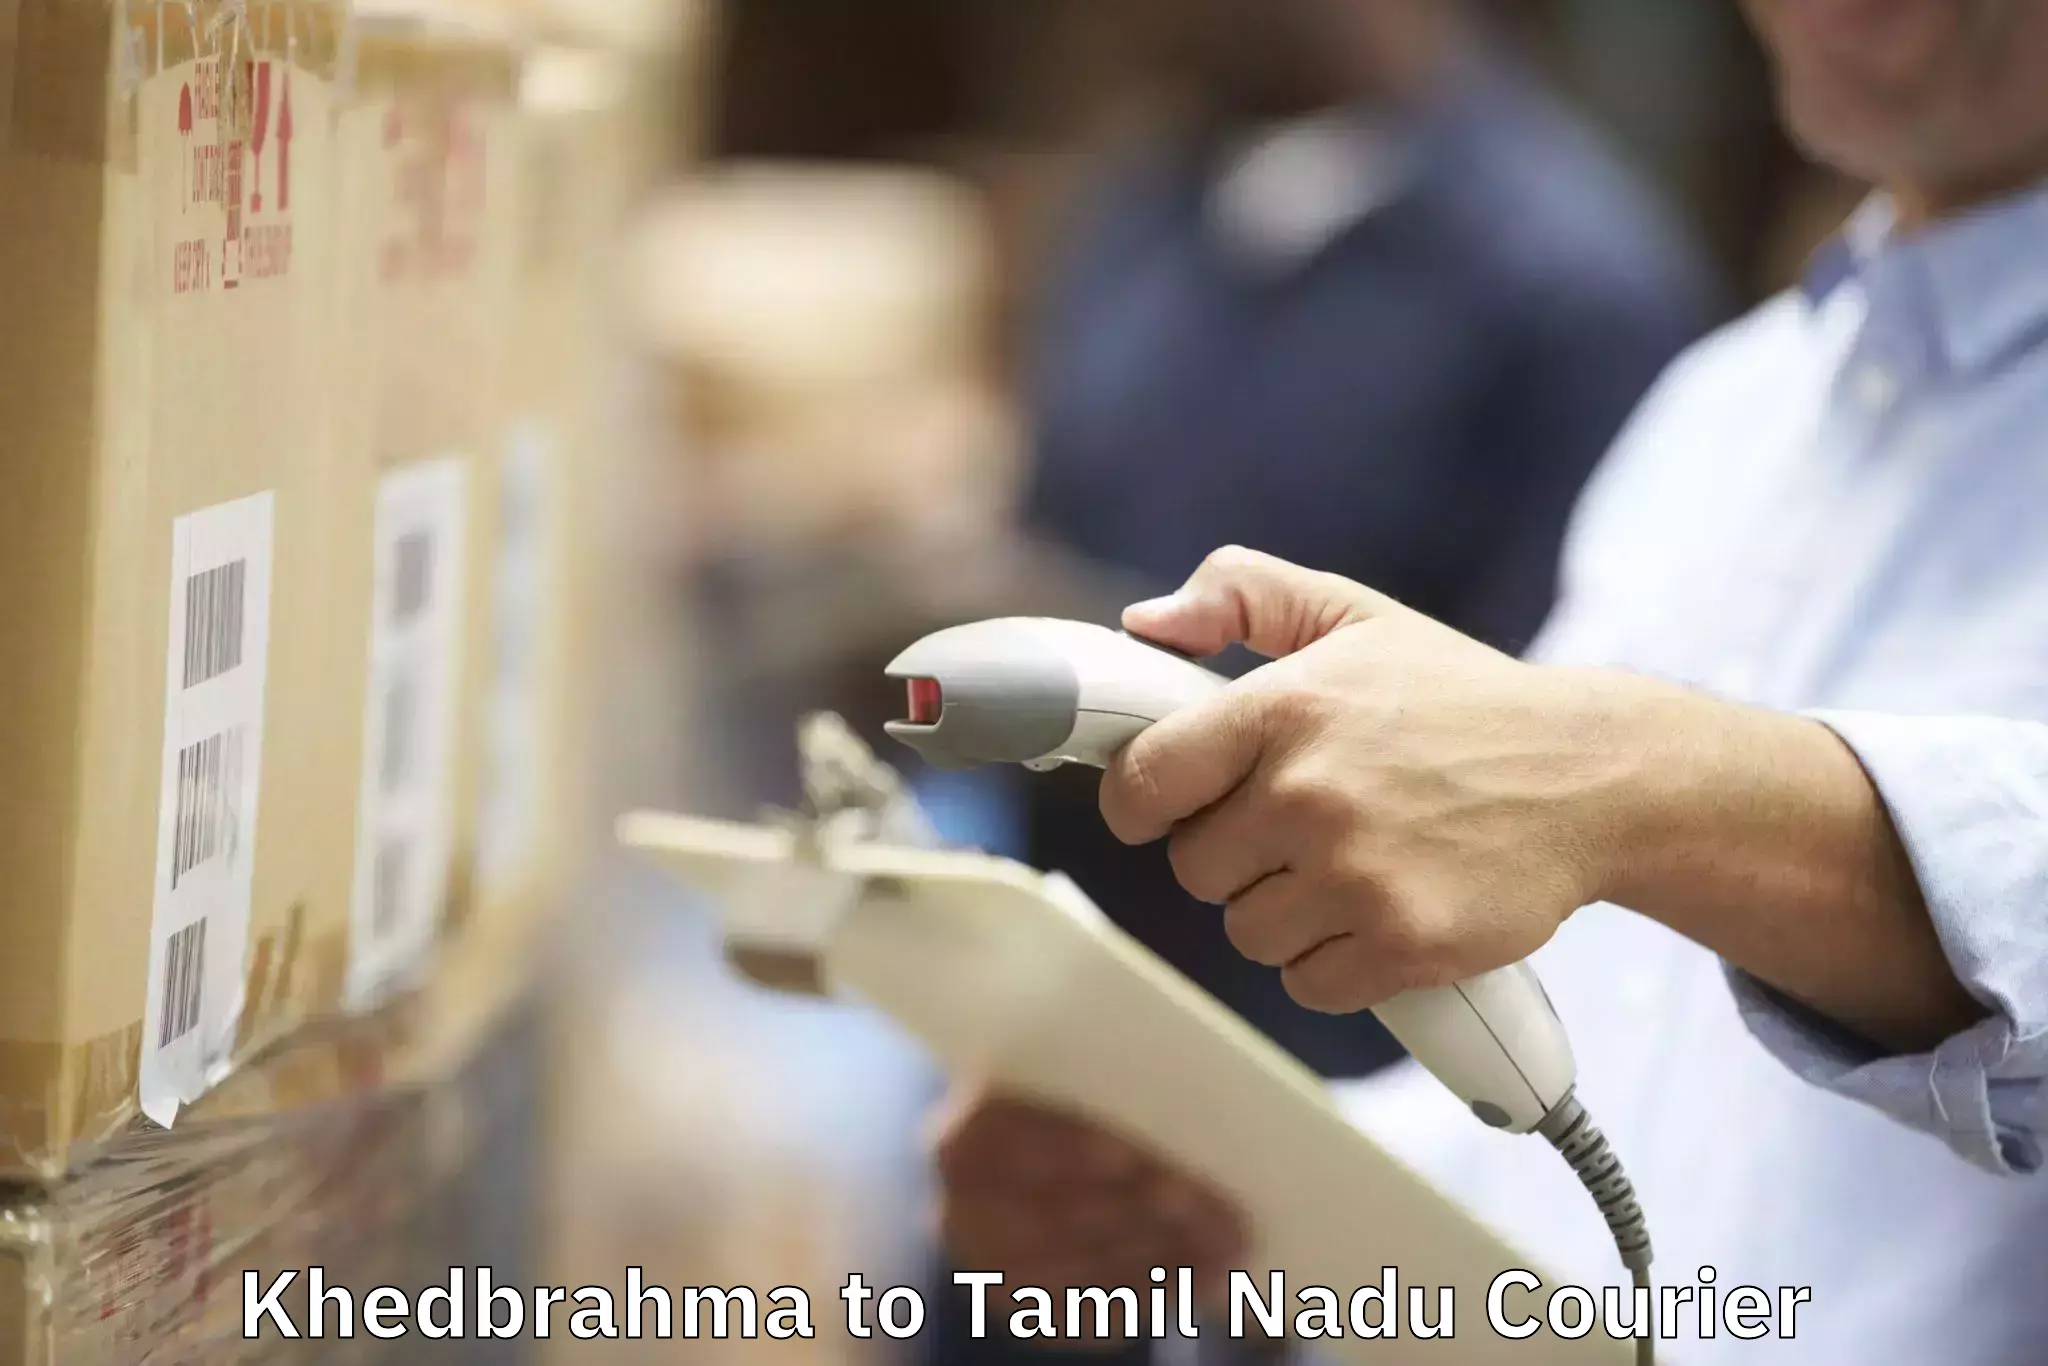 Skilled furniture movers Khedbrahma to Ennore Port Chennai